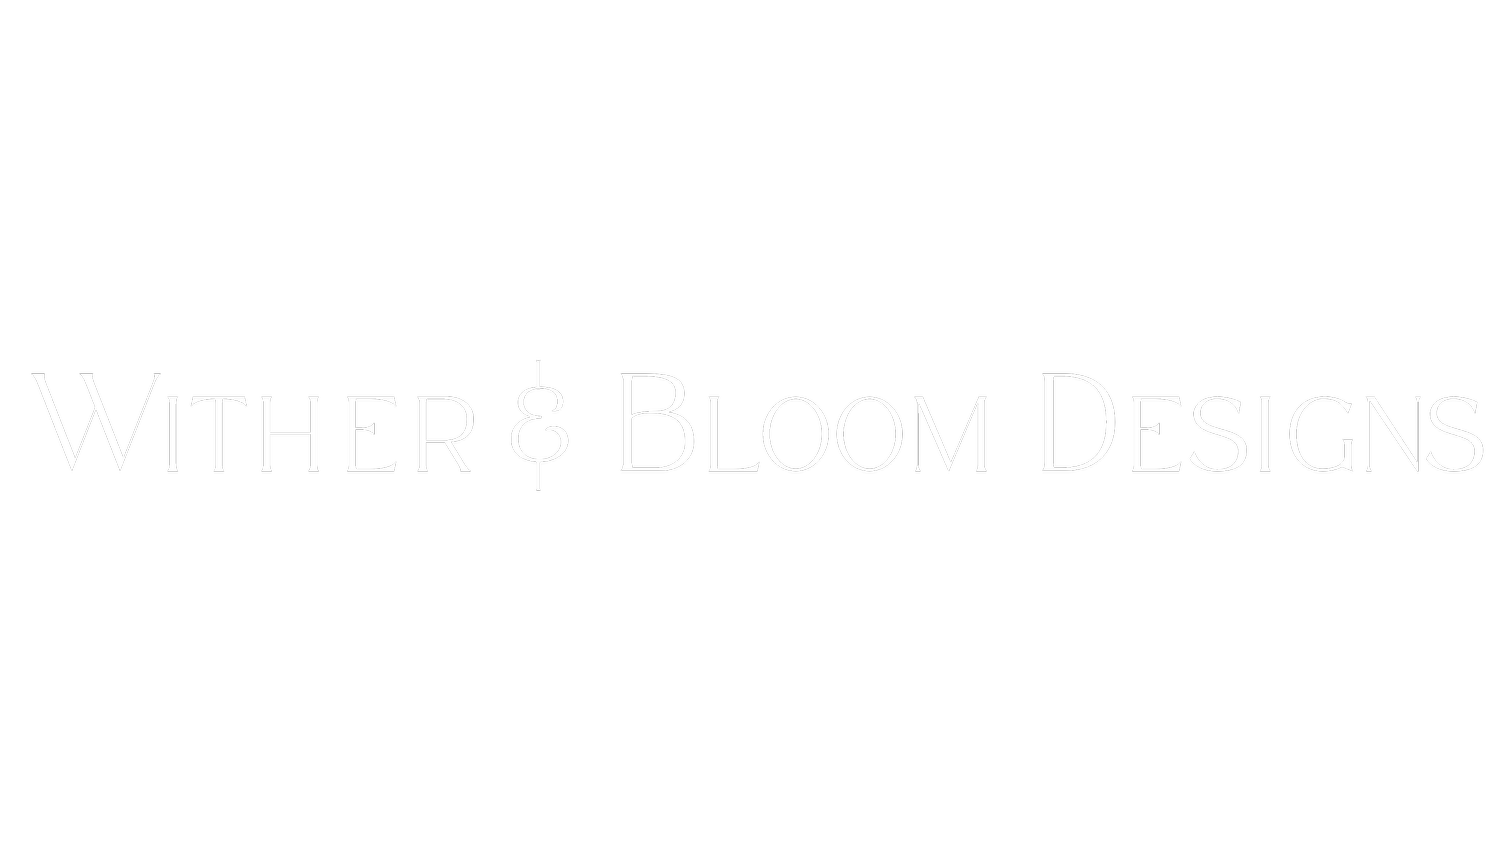 Wither and Bloom Designs